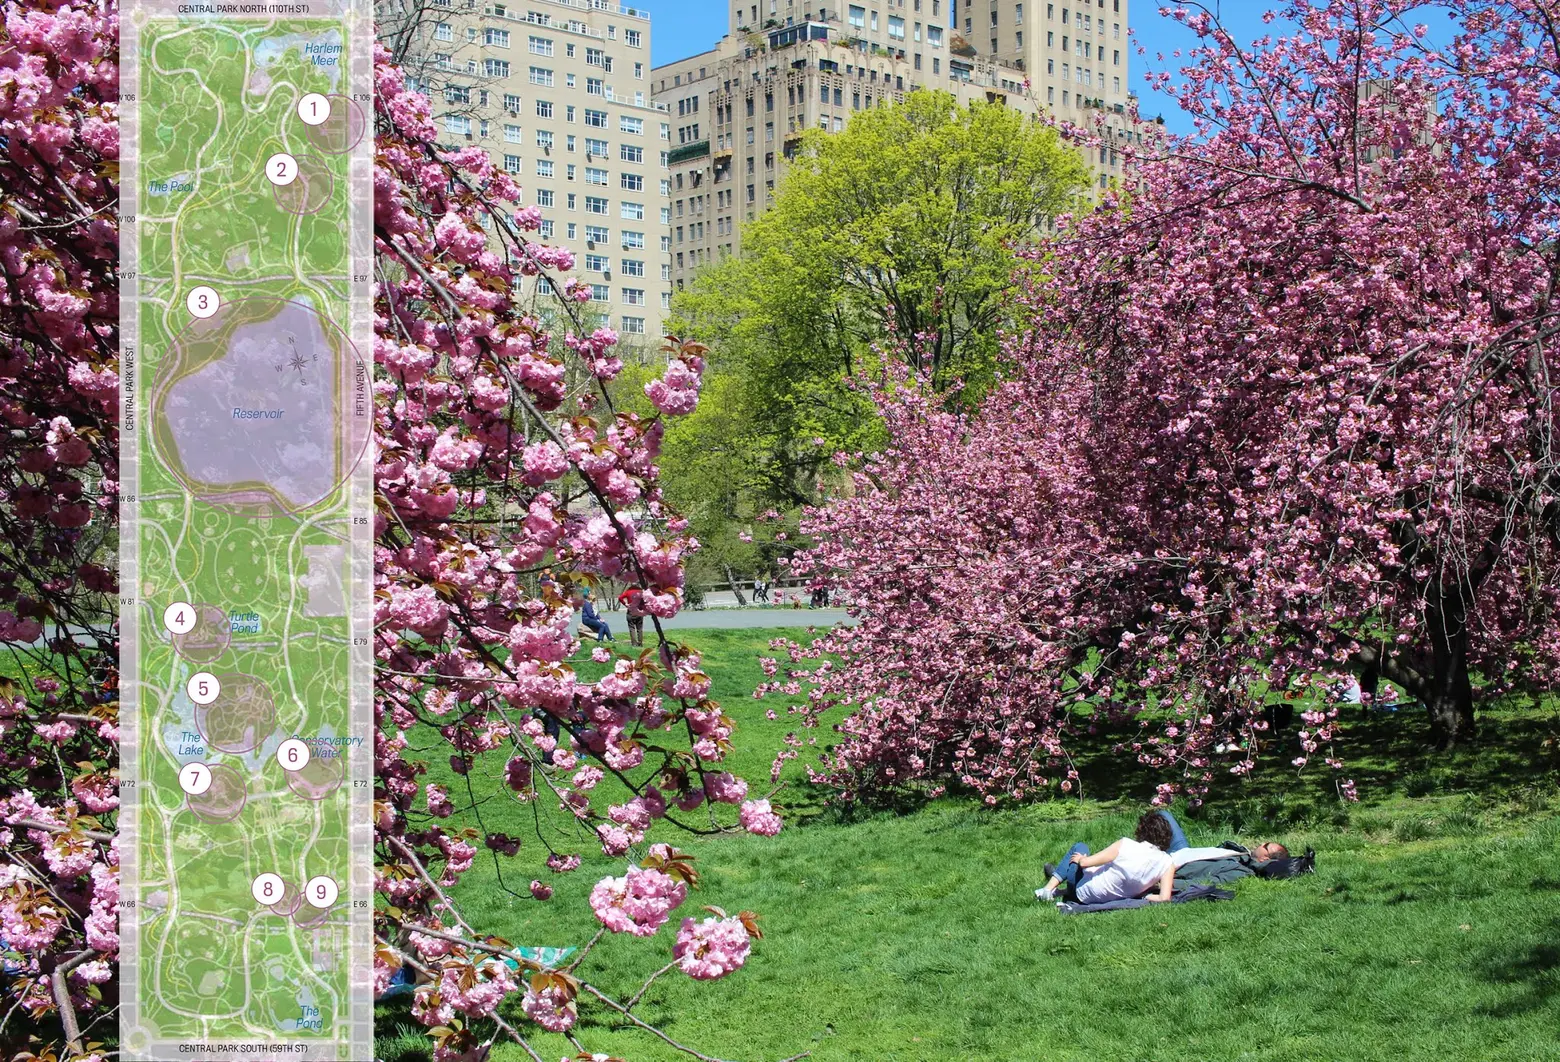 Find your favorite spring blooms in Central Park with a map and interactive guide